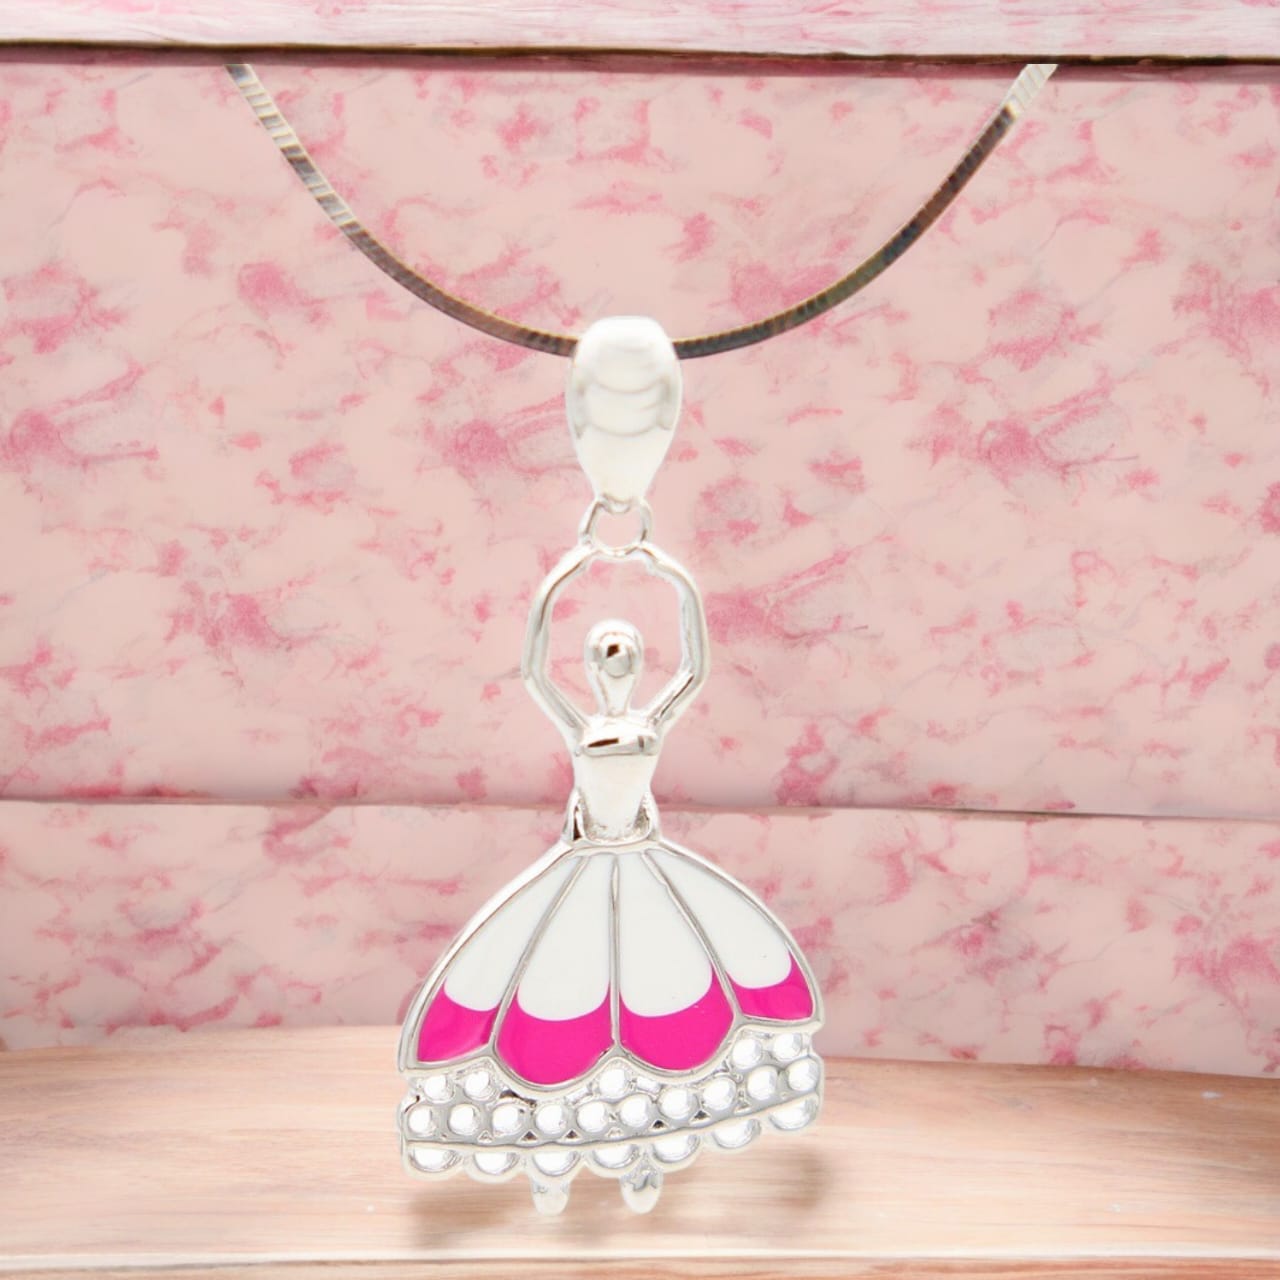 925 Sterling Silver Pink & White Enameled Dancing Girl Pendant For Girls and Women